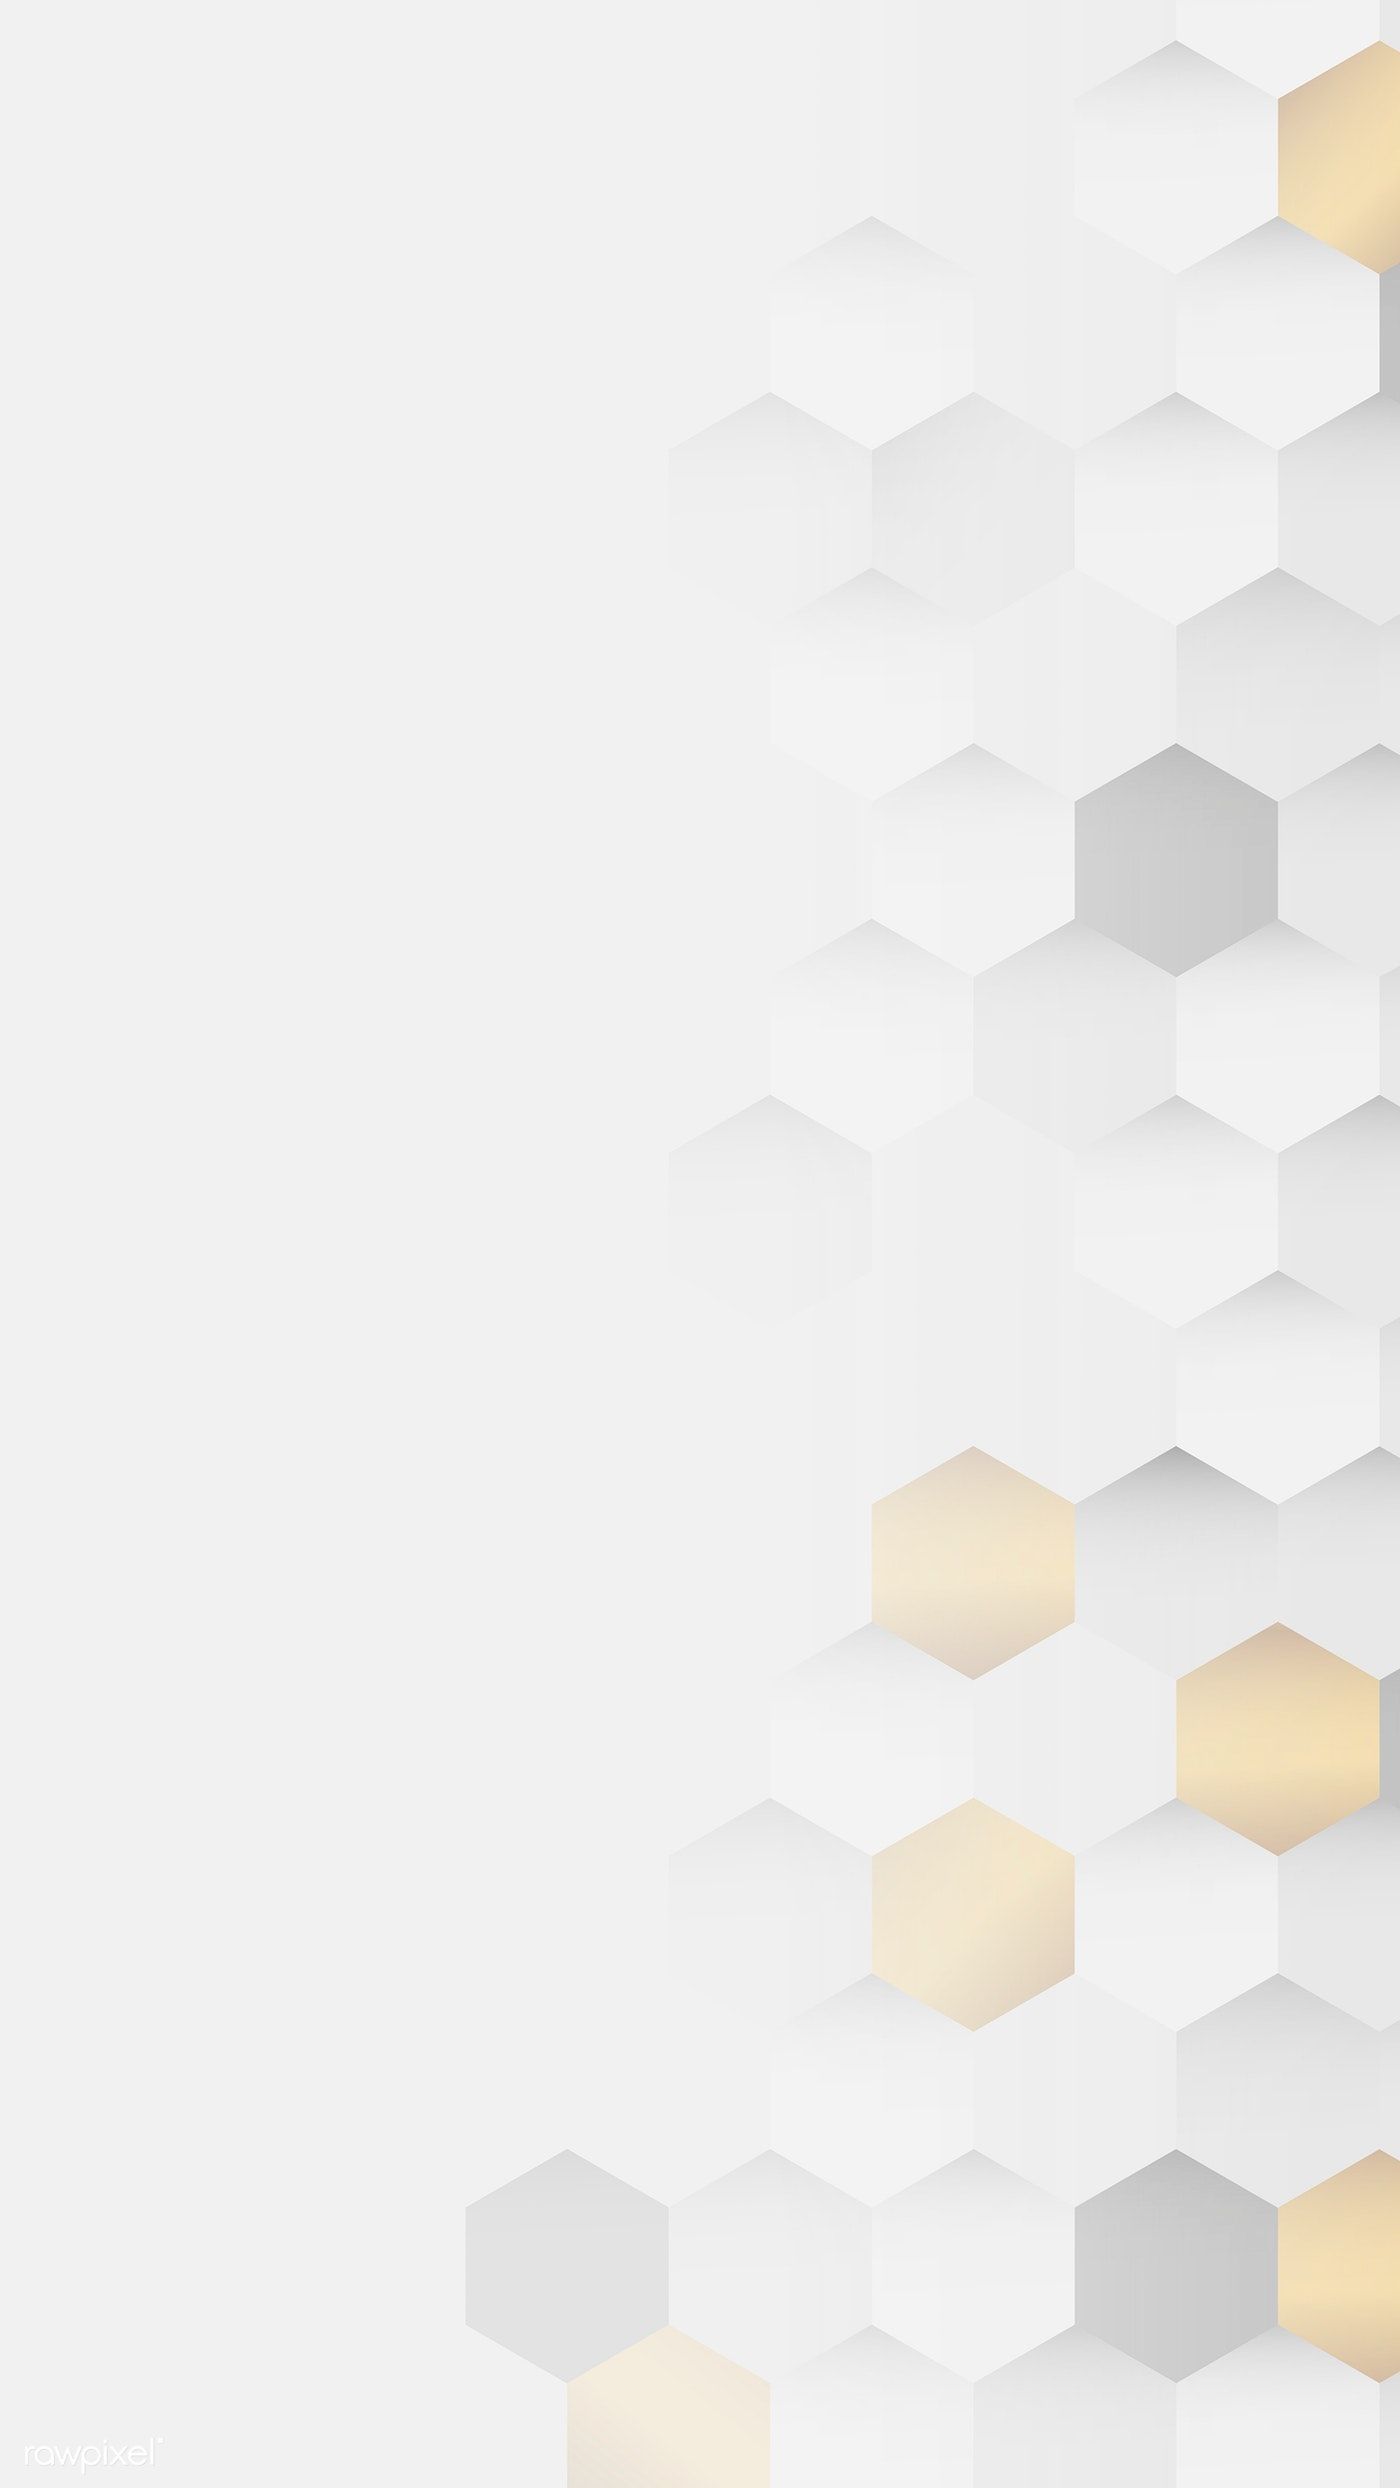 White and gold hexagon pattern background mobile phone wallpaper vector. premium image by rawpix. Background patterns, Vector background pattern, Hexagon pattern